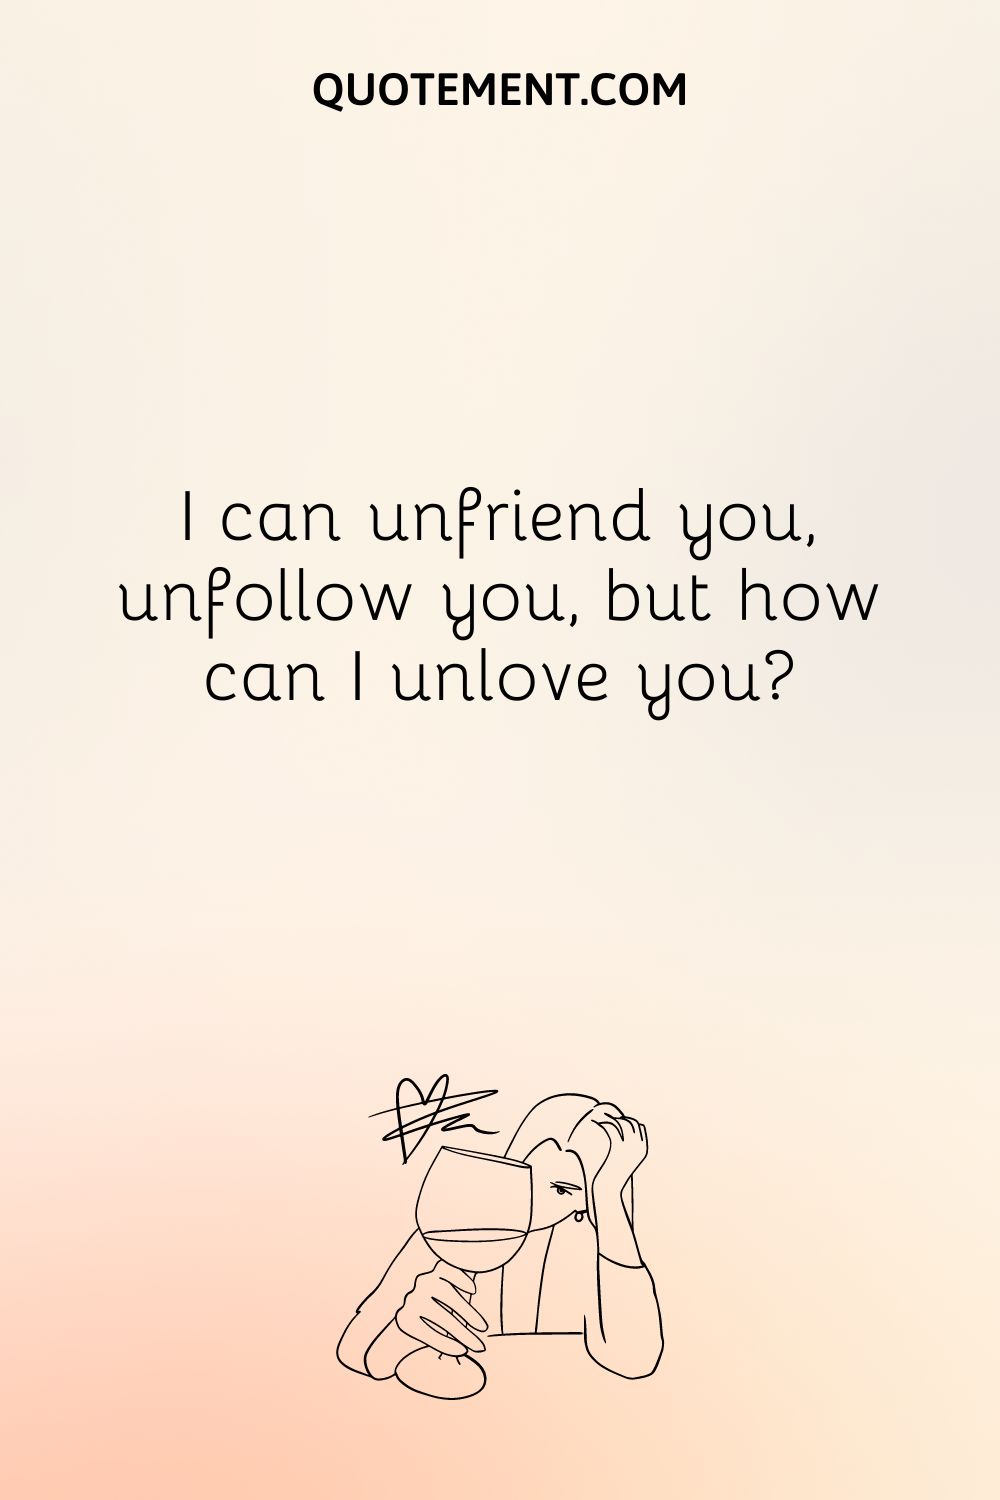  I can unfriend you, unfollow you, but how can I unlove you